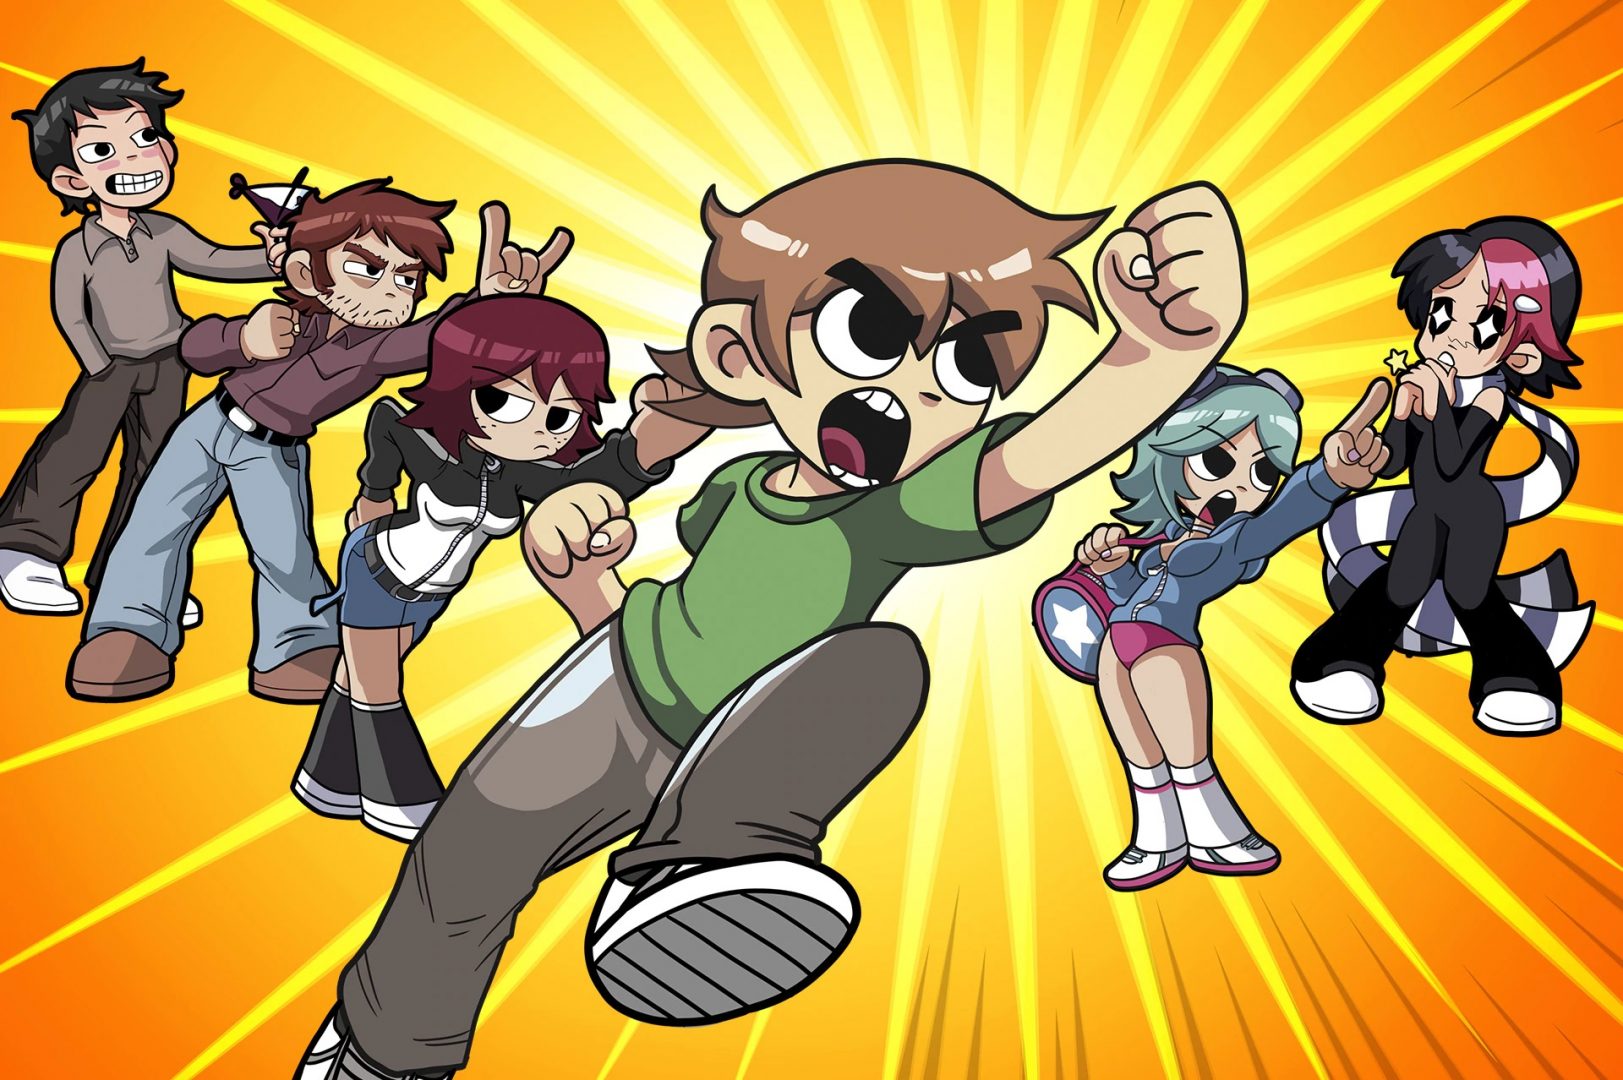 Scott Pilgrim vs. The World: The Game - Complete Edition Review